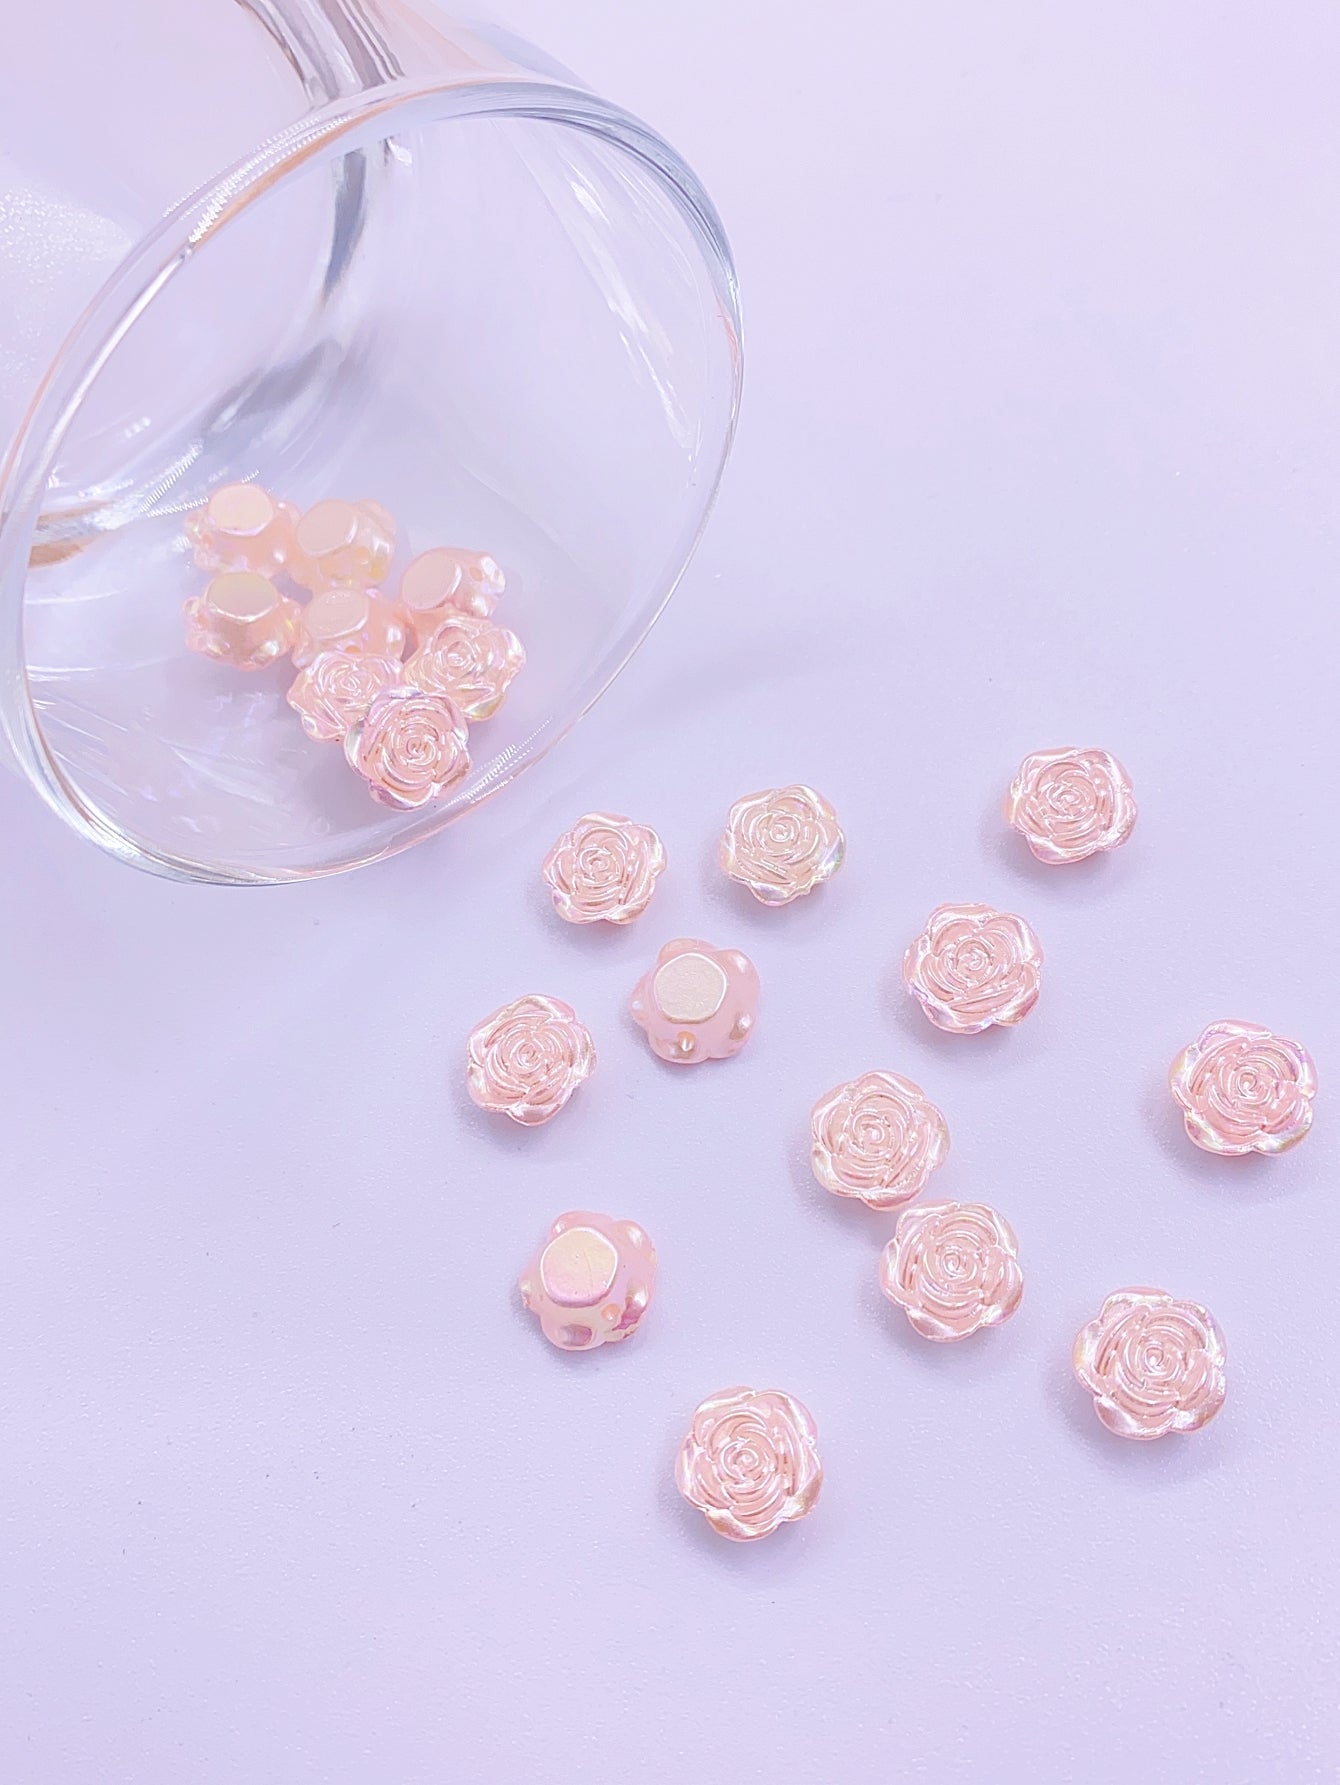 New ABS imitation pearl colorful flat flat straight hole rose decorative material diy jewelry accessories straight hole pearl